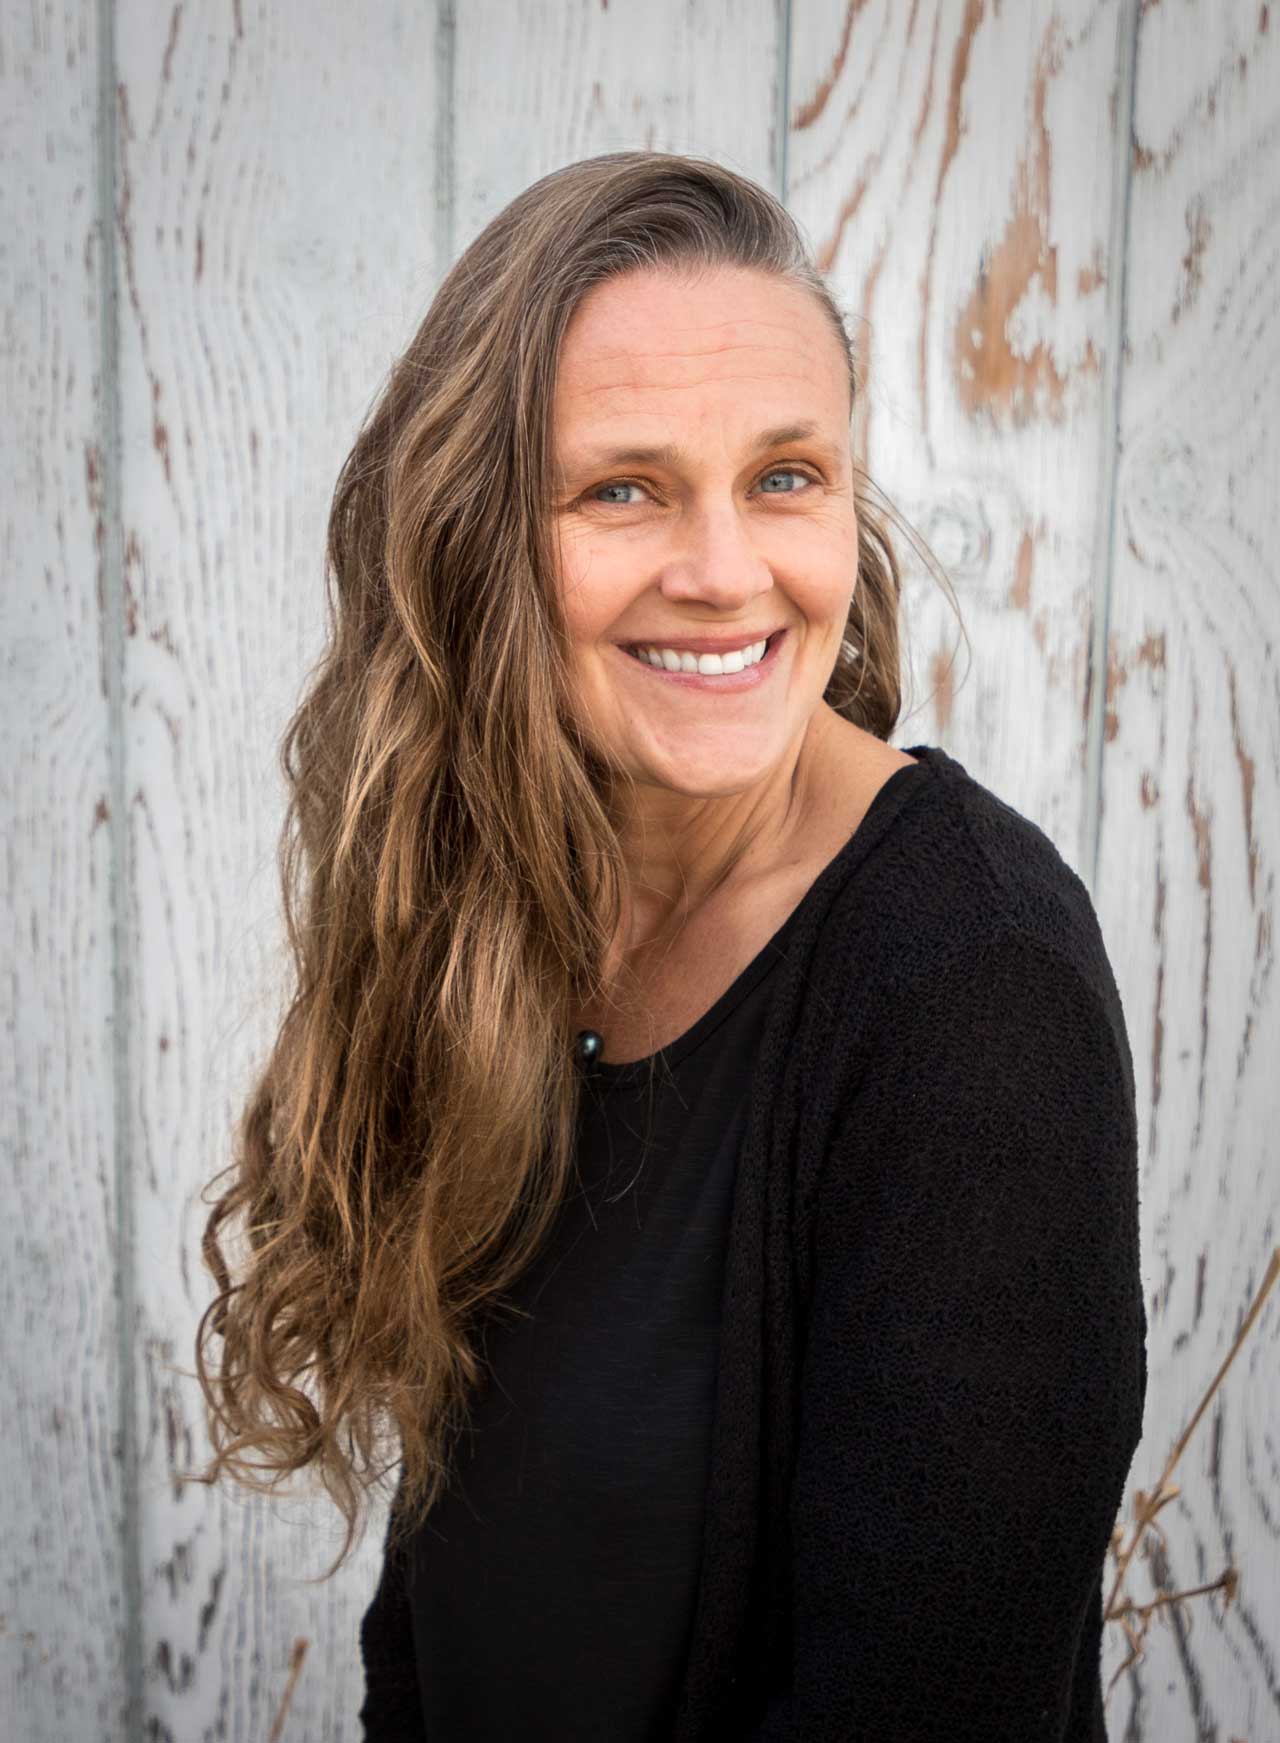 Christi has her Masters Degree in Oriental Medicine, and is a Montana State licensed Acupuncturist and Herbalist located in Columbia Falls, MT.